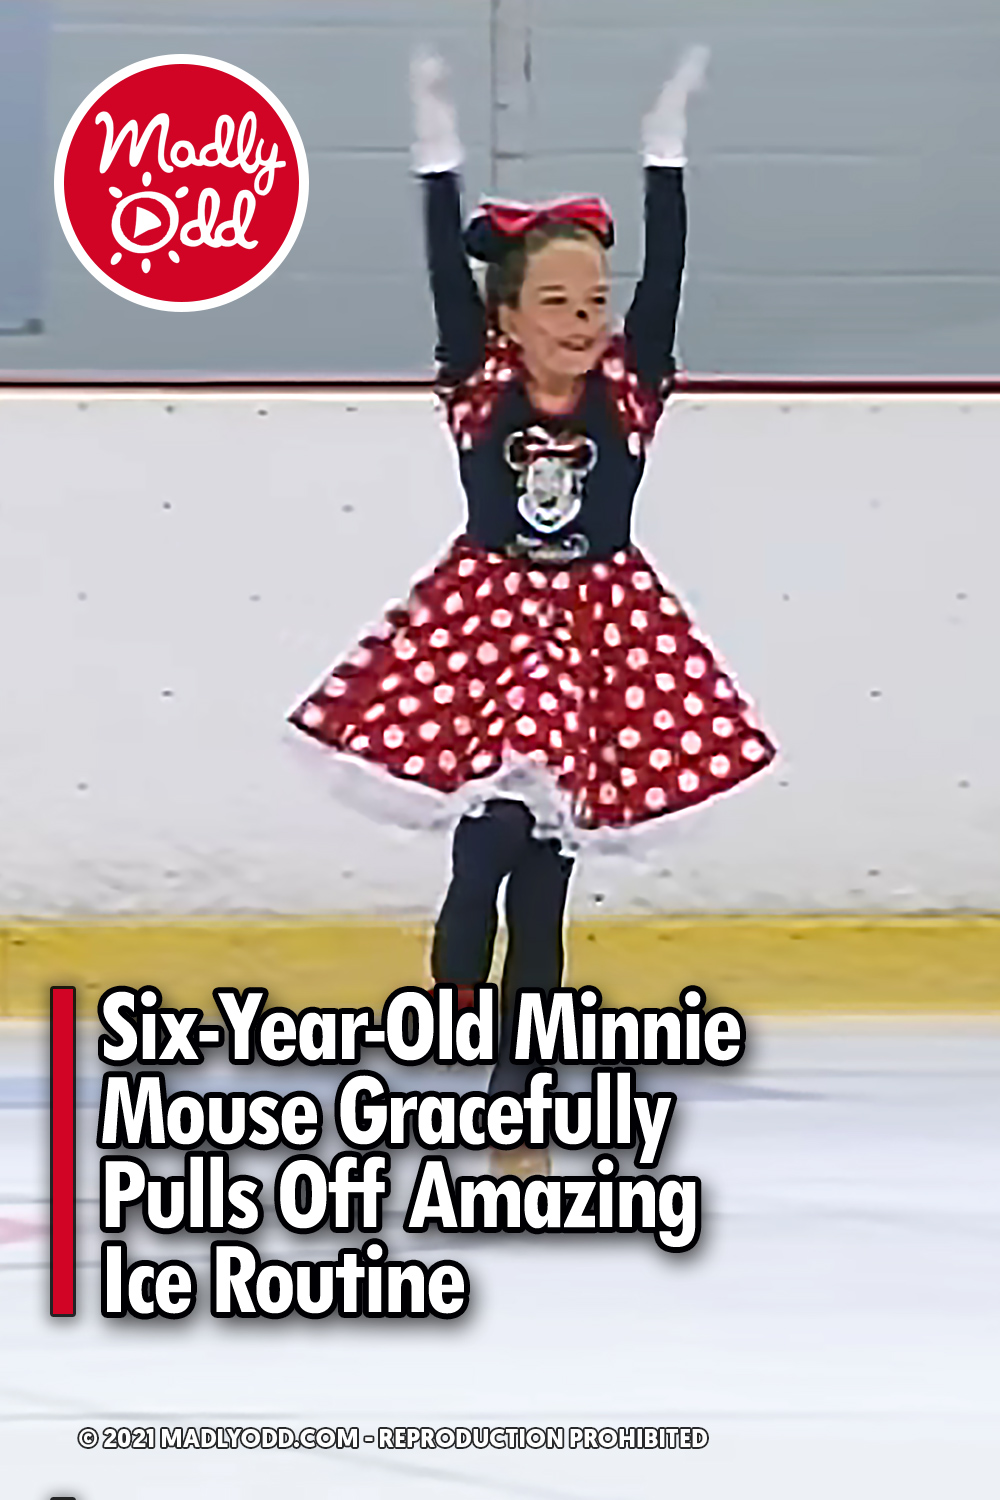 Six-Year-Old Minnie Mouse Gracefully Pulls Off Amazing Ice Routine